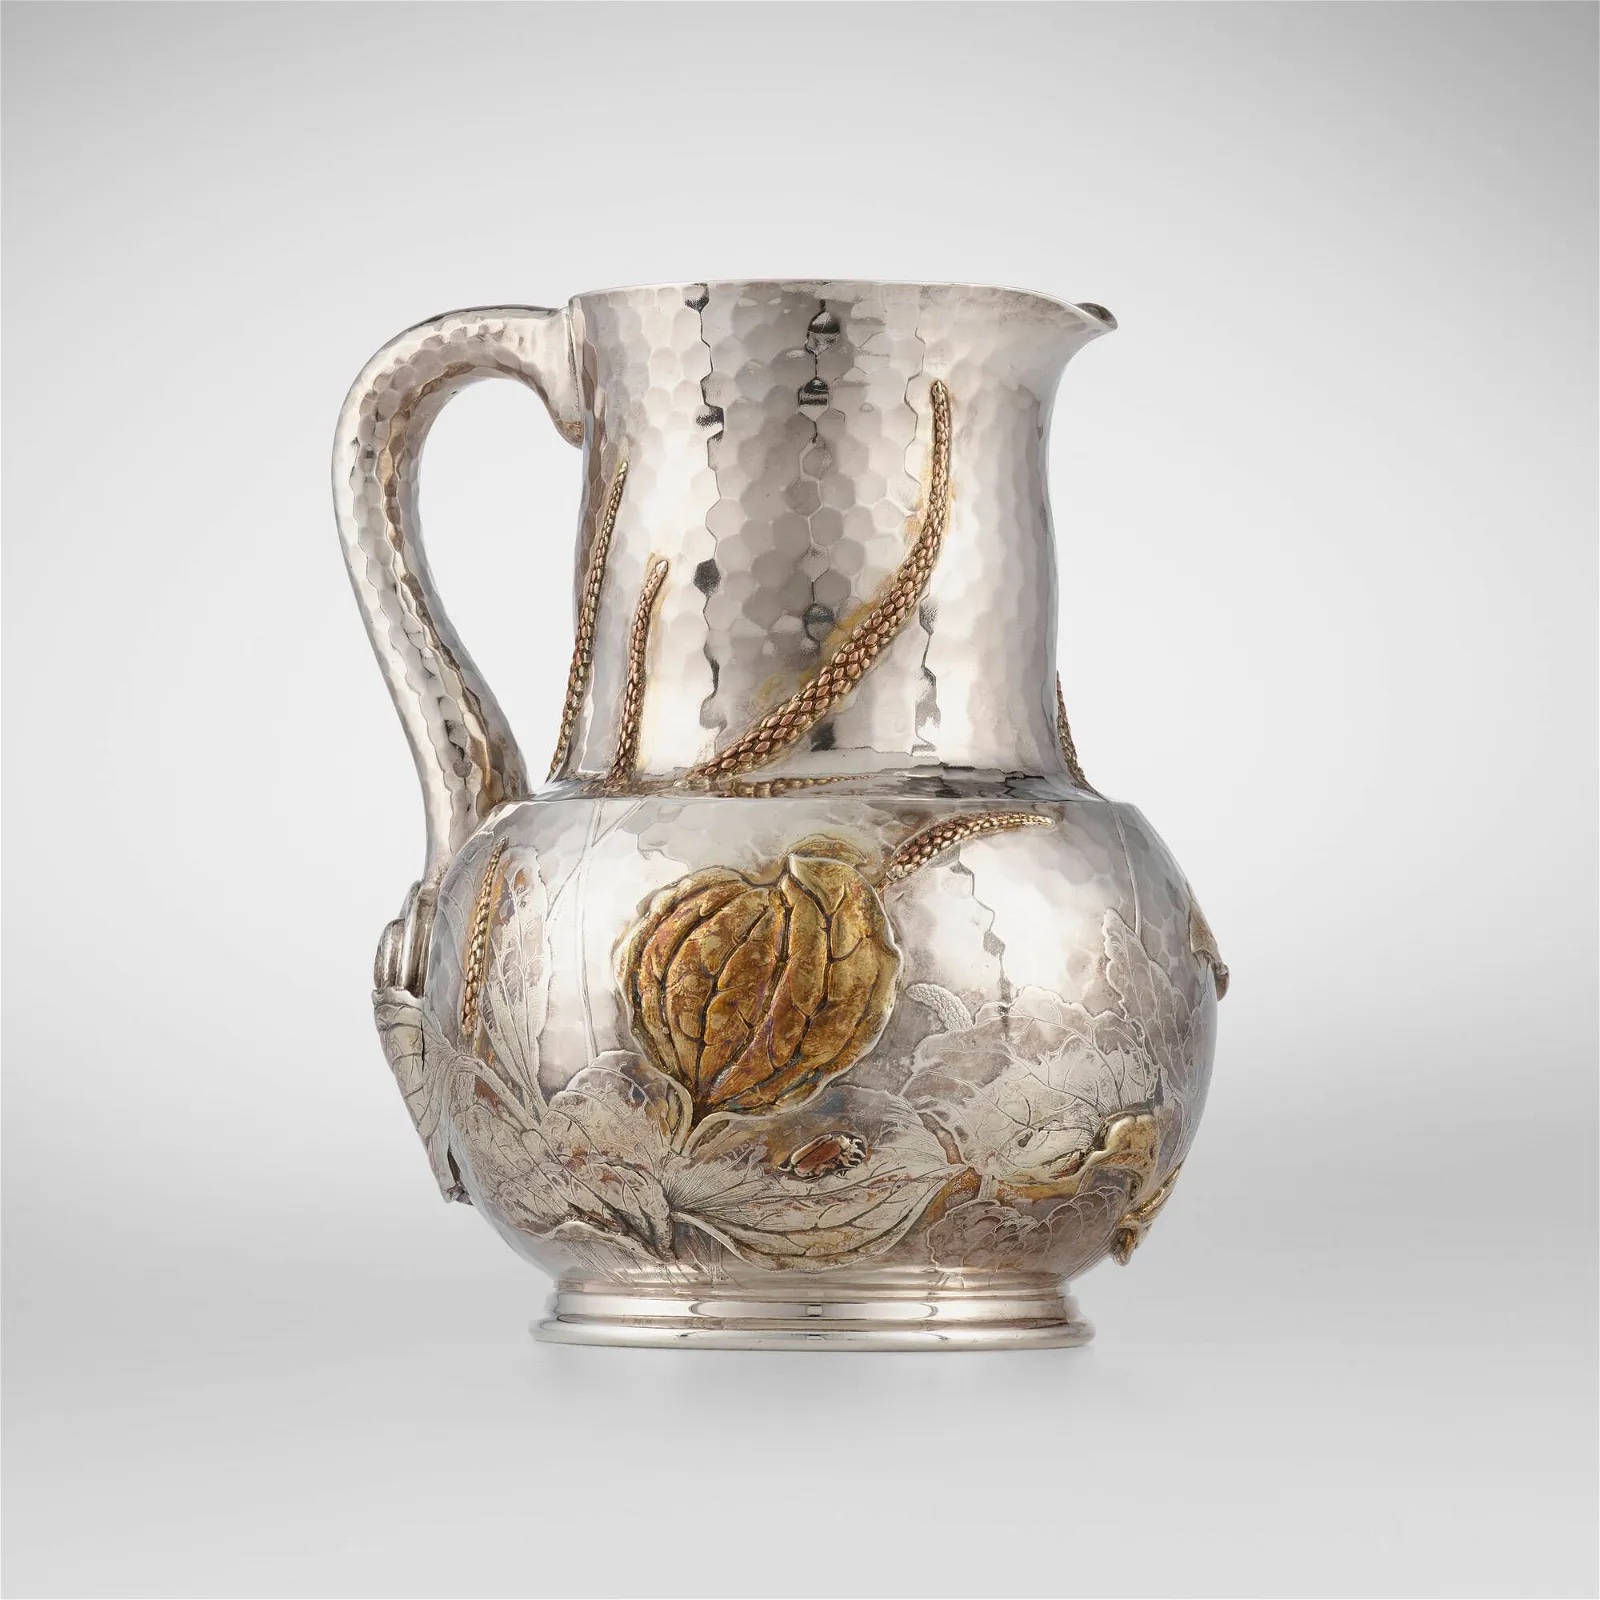 Tiffany &#038; Co. Aesthetic Movement Pitcher leads our five auction highlights